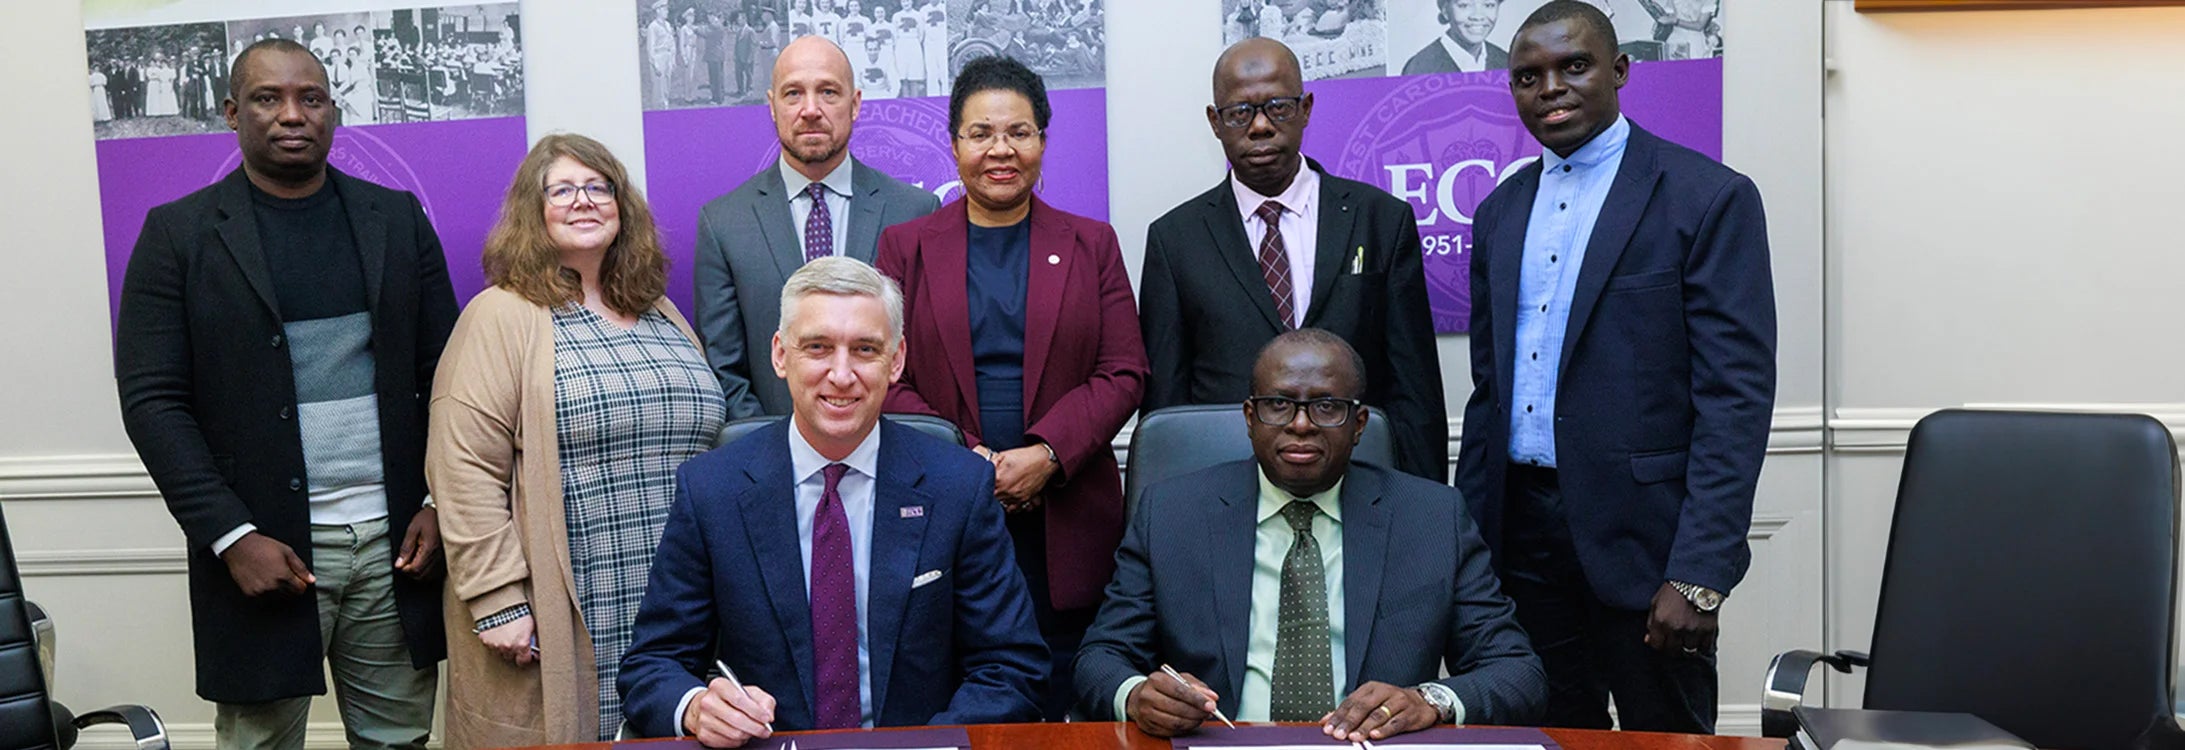 Last week ECU’s Office of Global Affairs hosted University of The Gambia Vice Chancellor Herbert Robinson and his delegation to the ECU campus to discuss how we may be able to build upon the success of our virtual exchange partnerships to expand collaboration between the two universities. Read the full article about the visit.